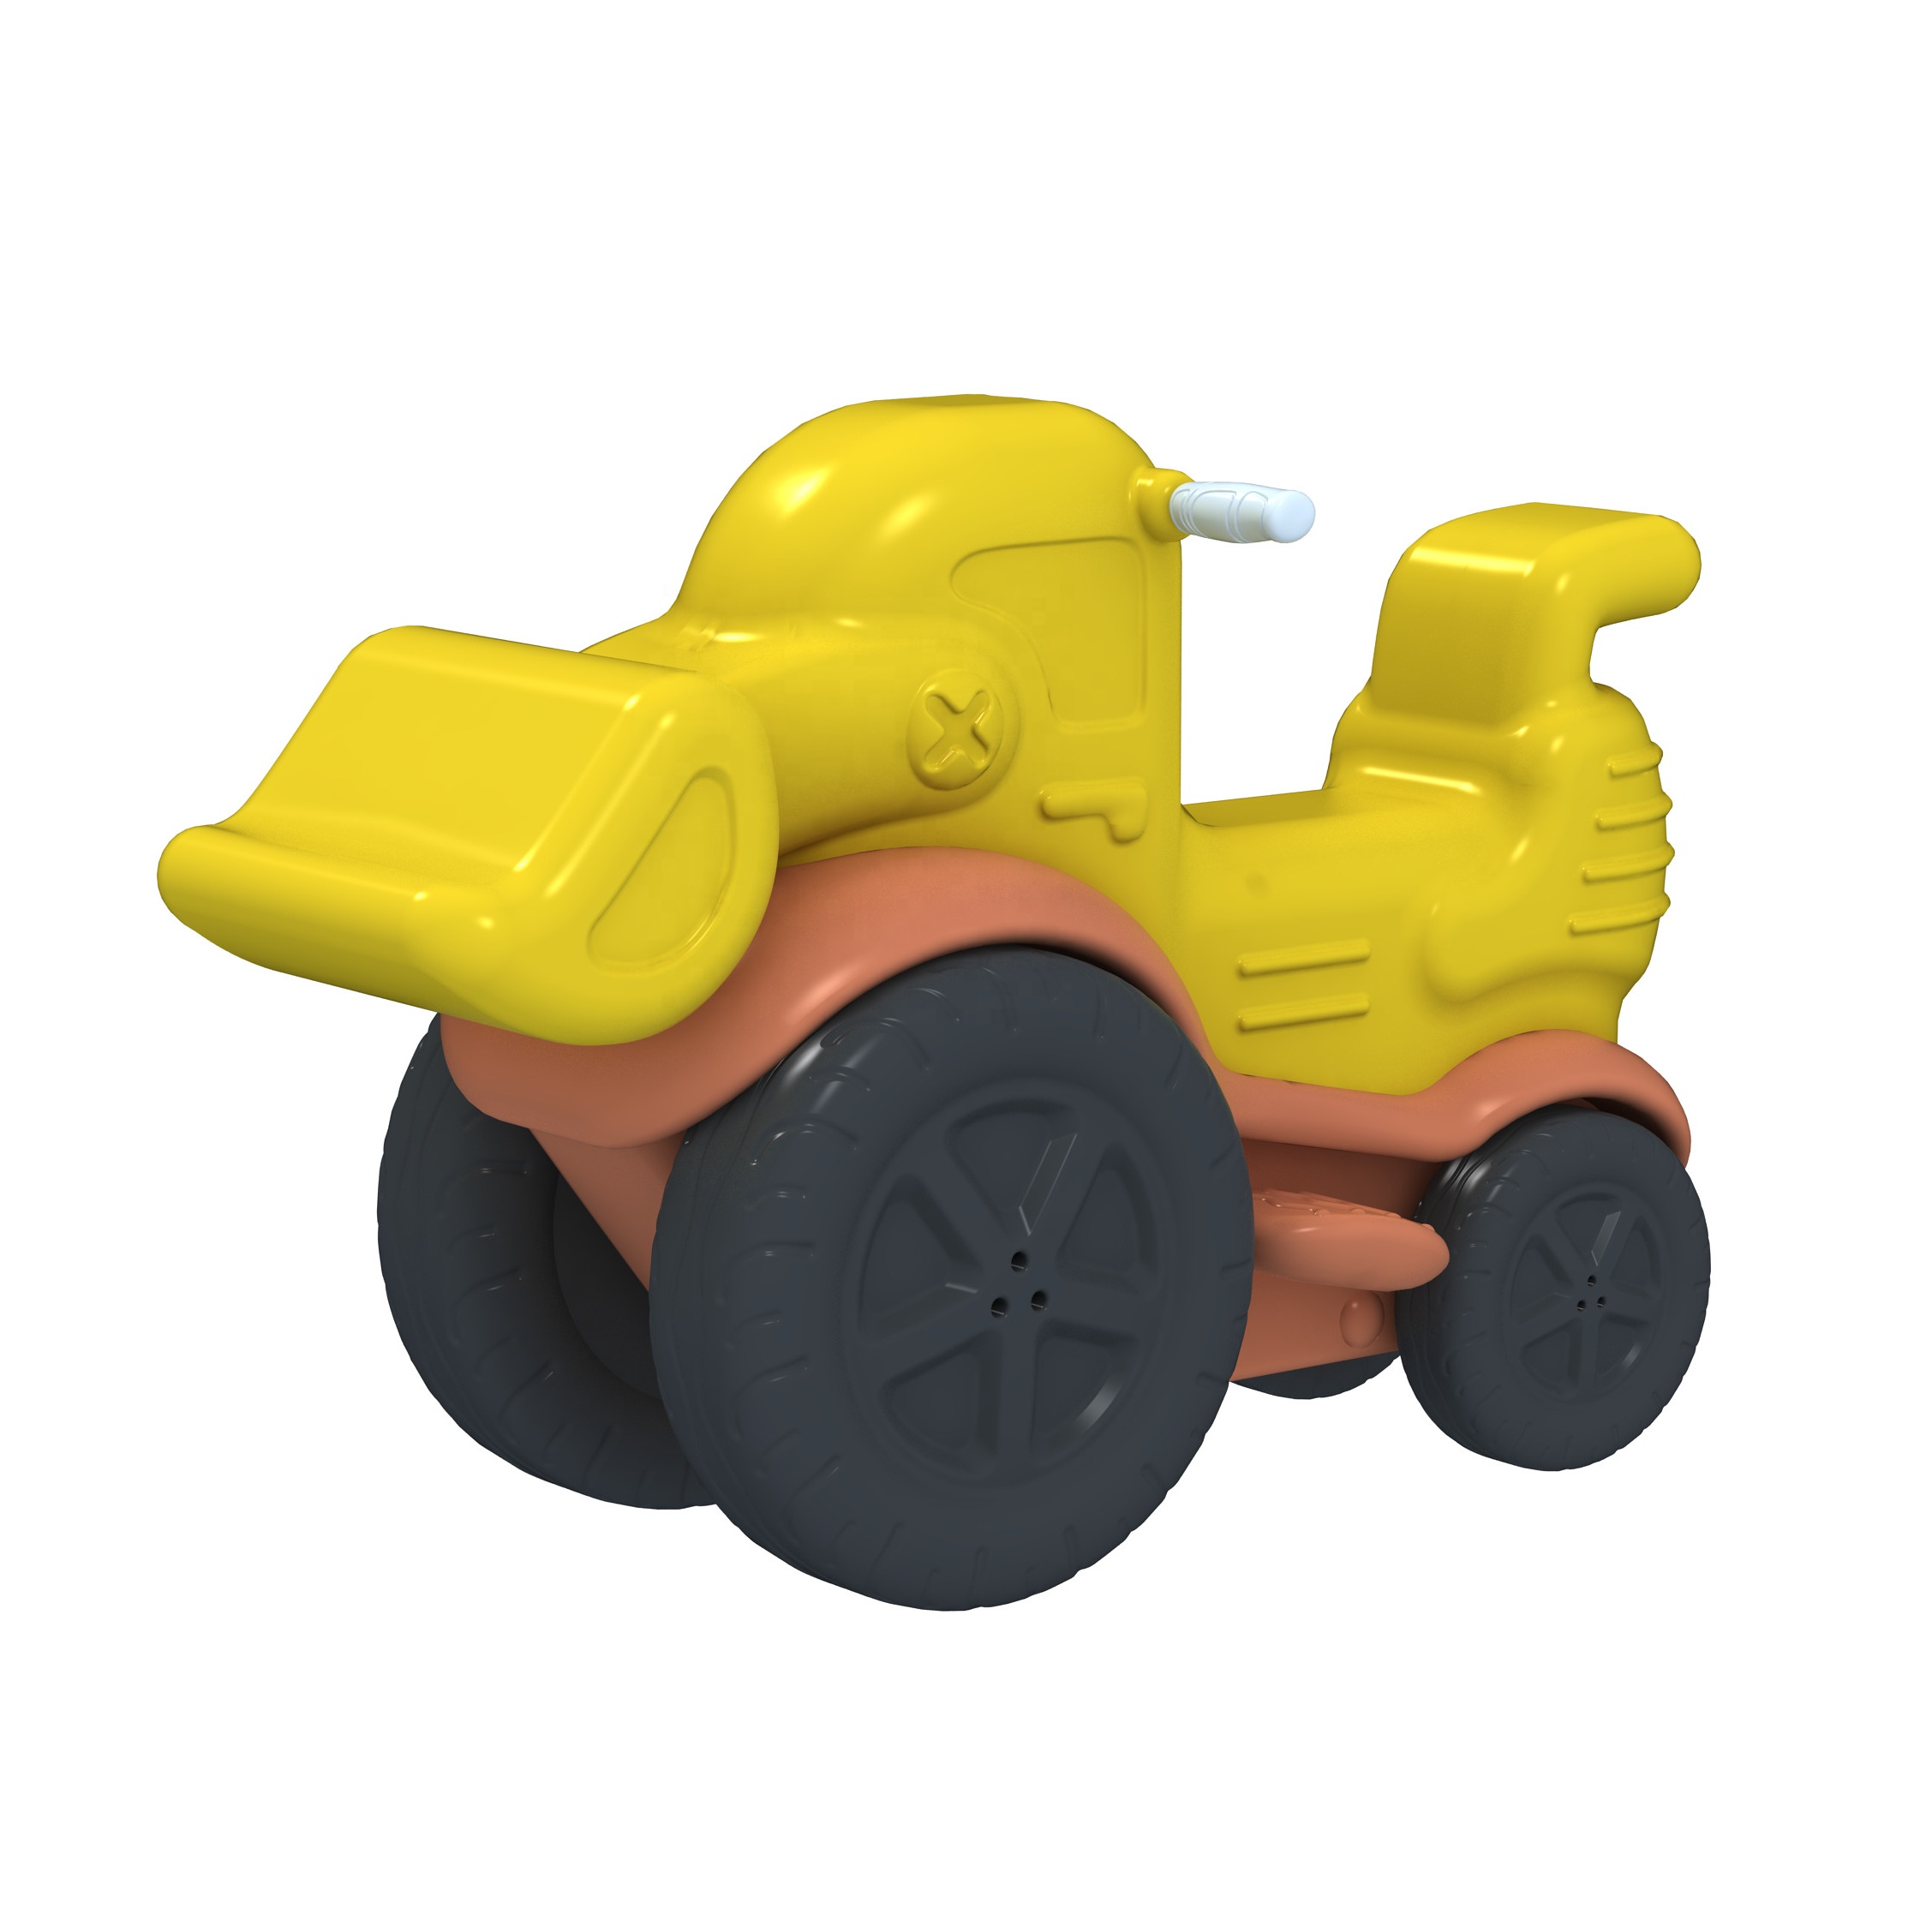 IDO outdoor playground tank kids outdoor small yellow toy car interesting outdoor playground toy car